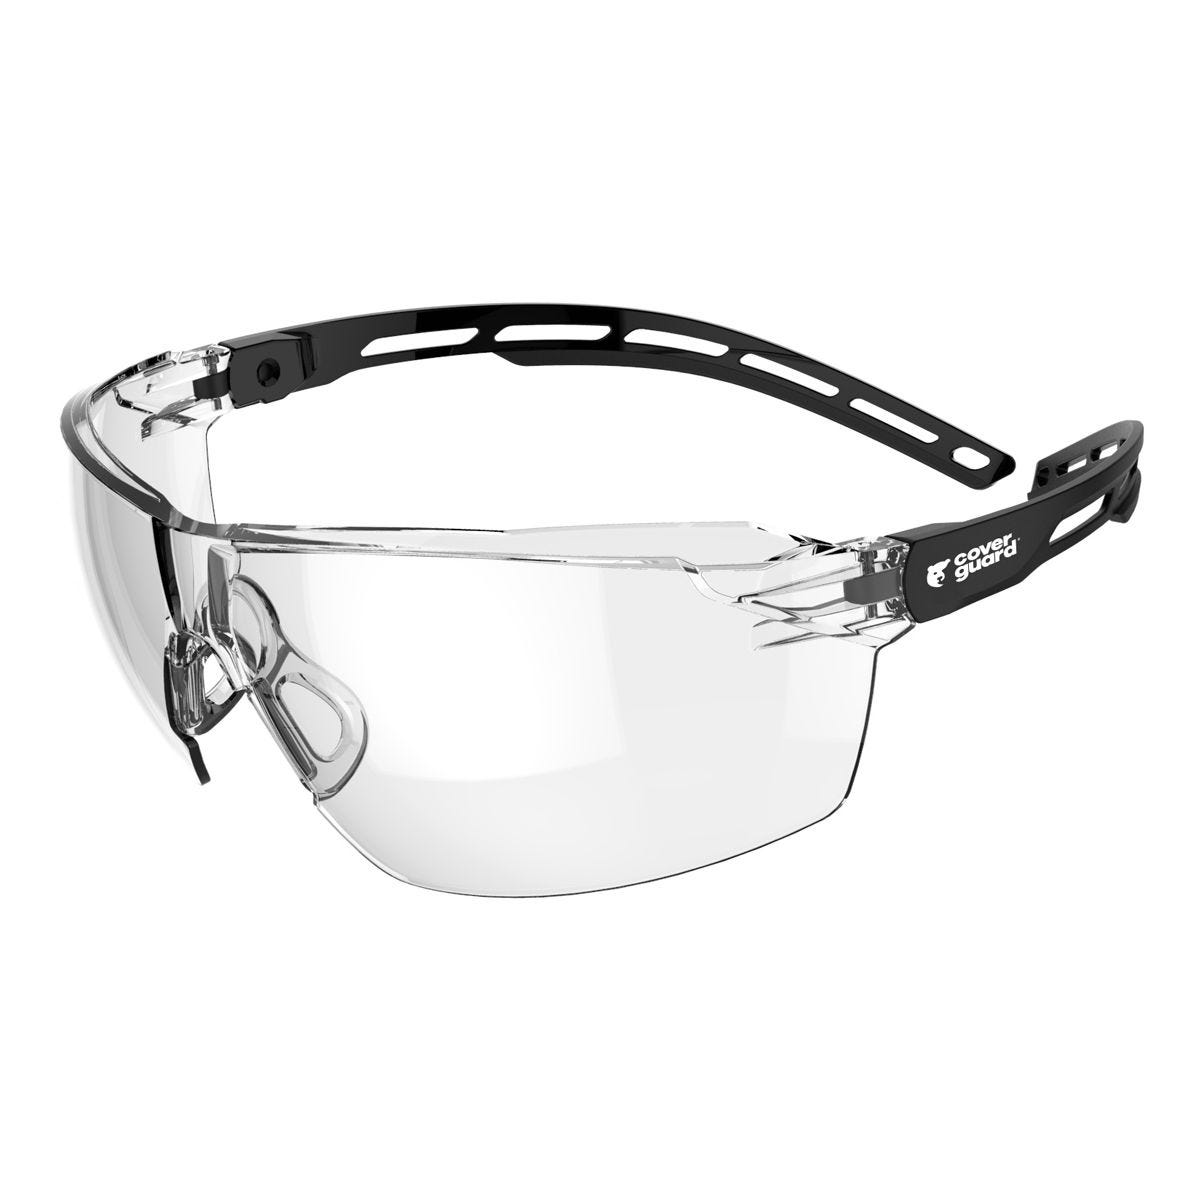 Lunettes de protection Tiger first AR incolore - Coverguard 0